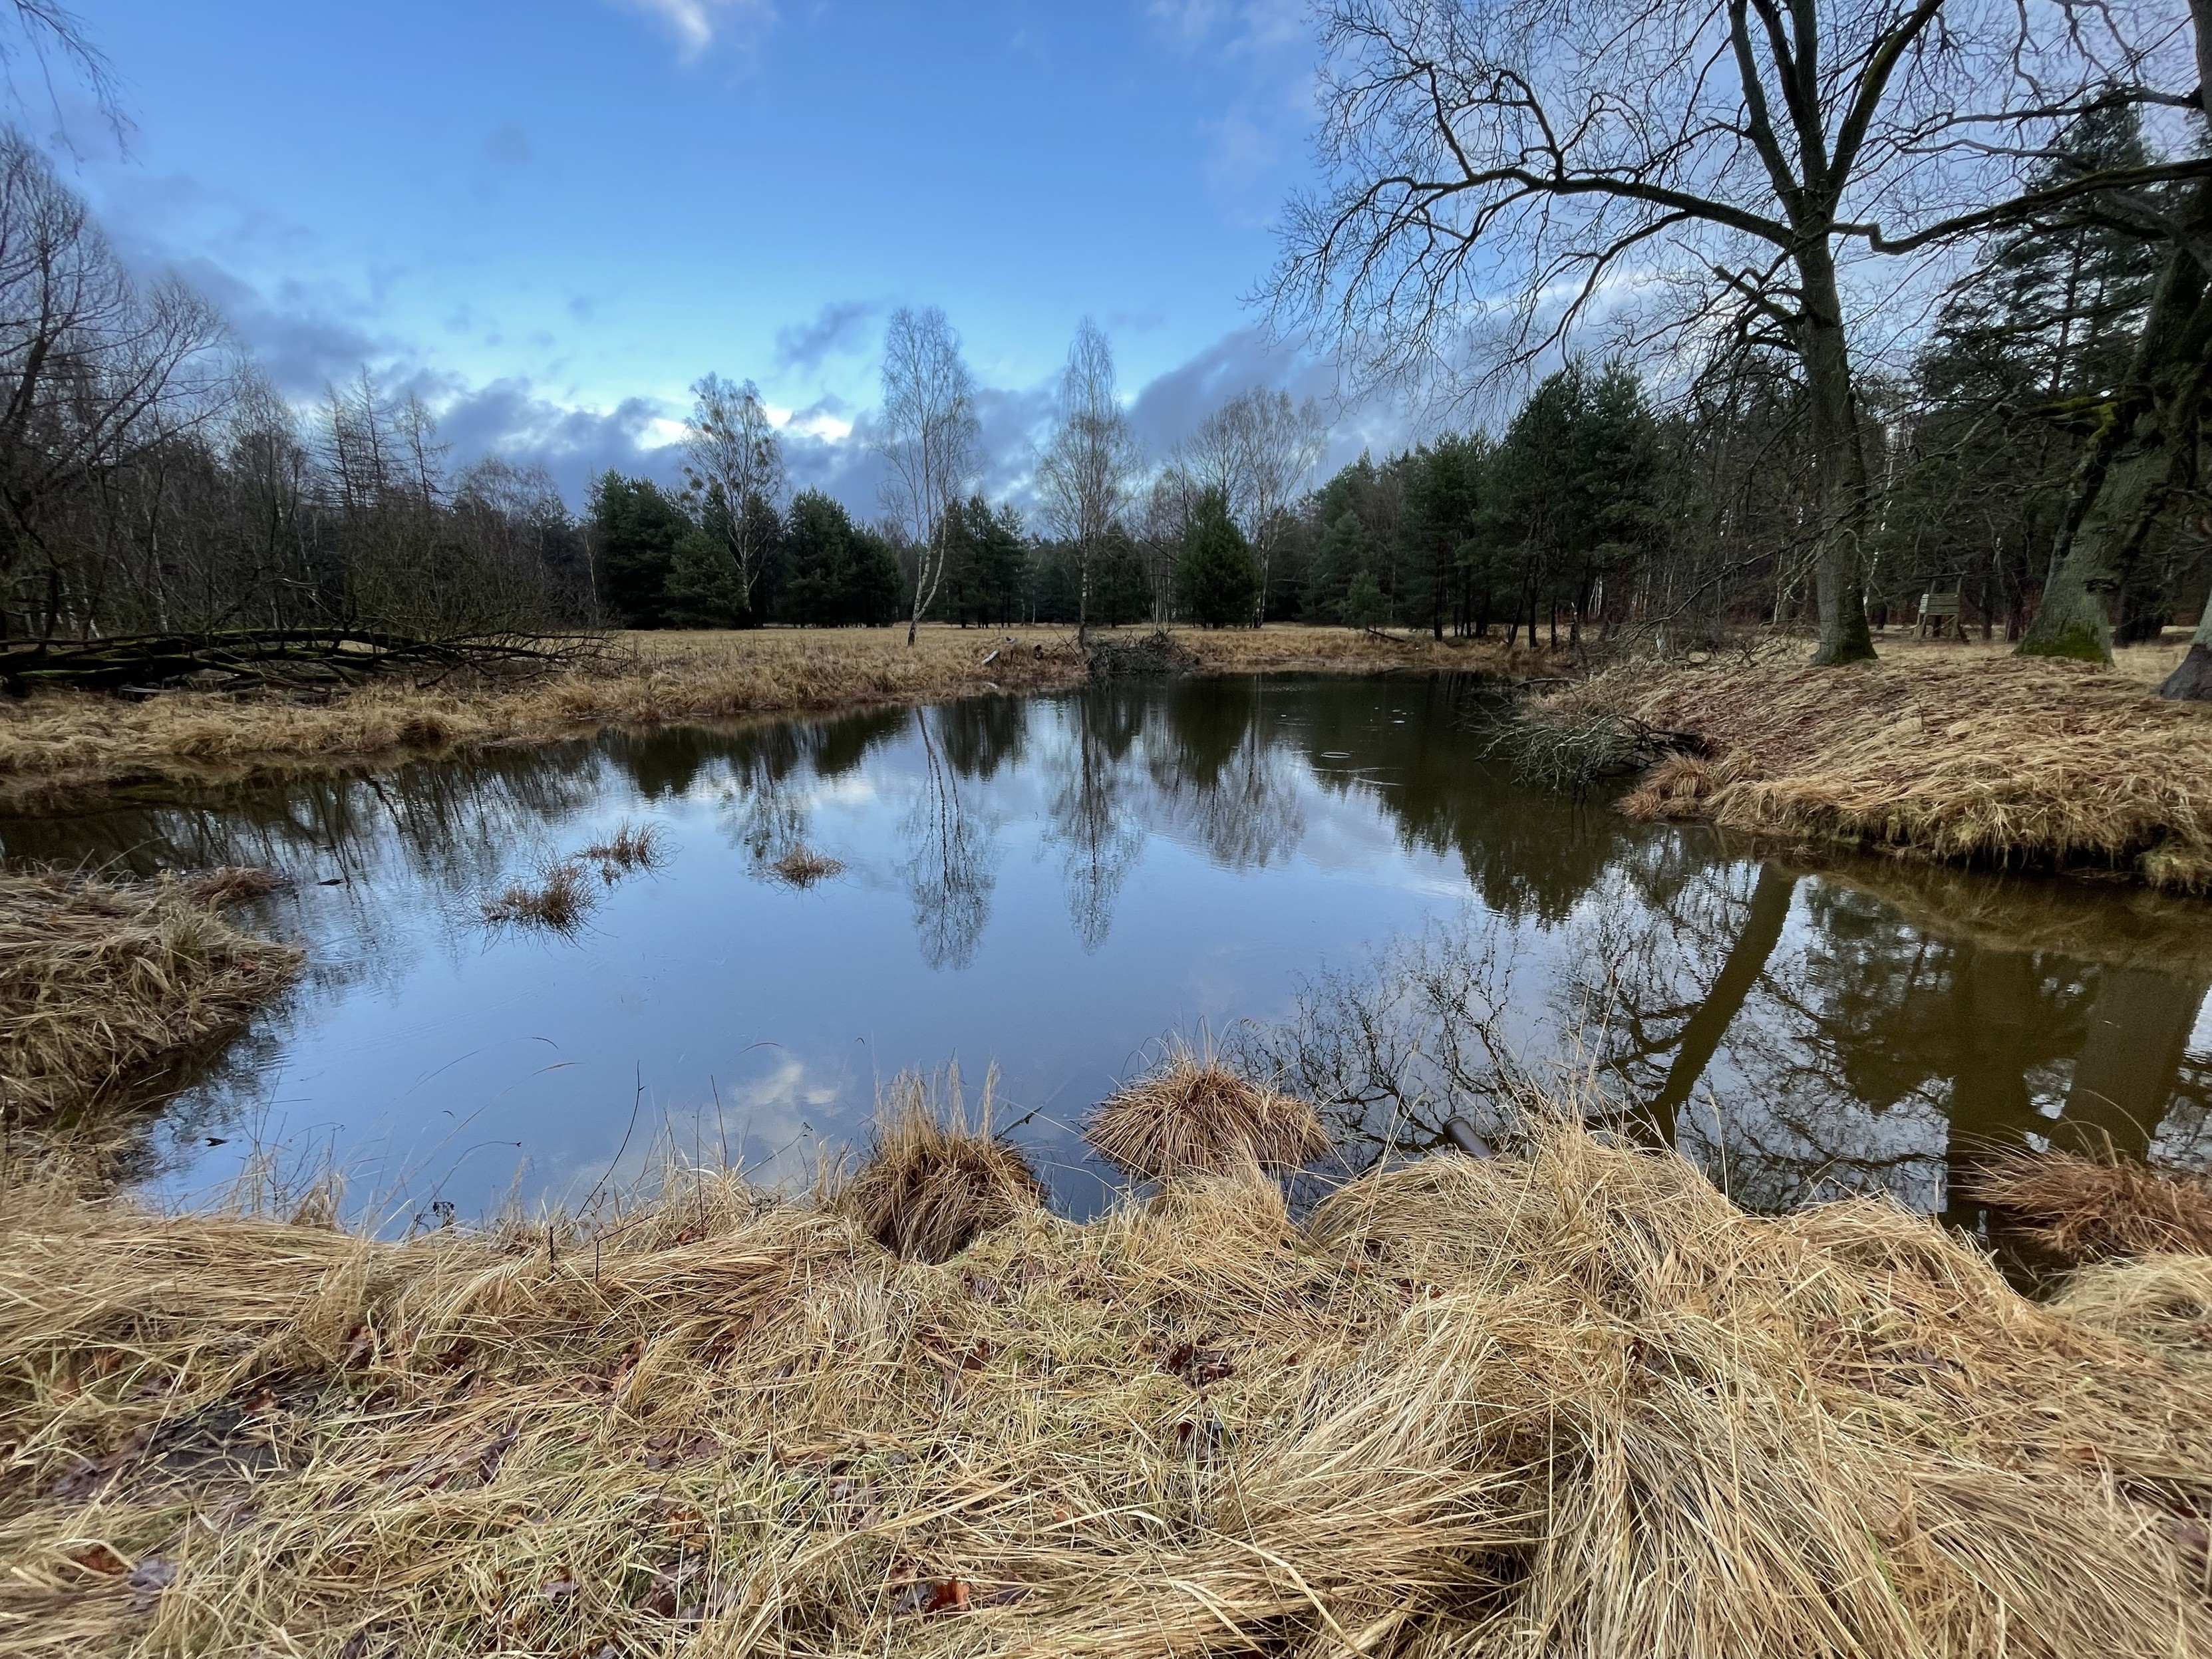 A serene pond surrounded by grass, bare trees, and evergreens under a cloudy blue sky.